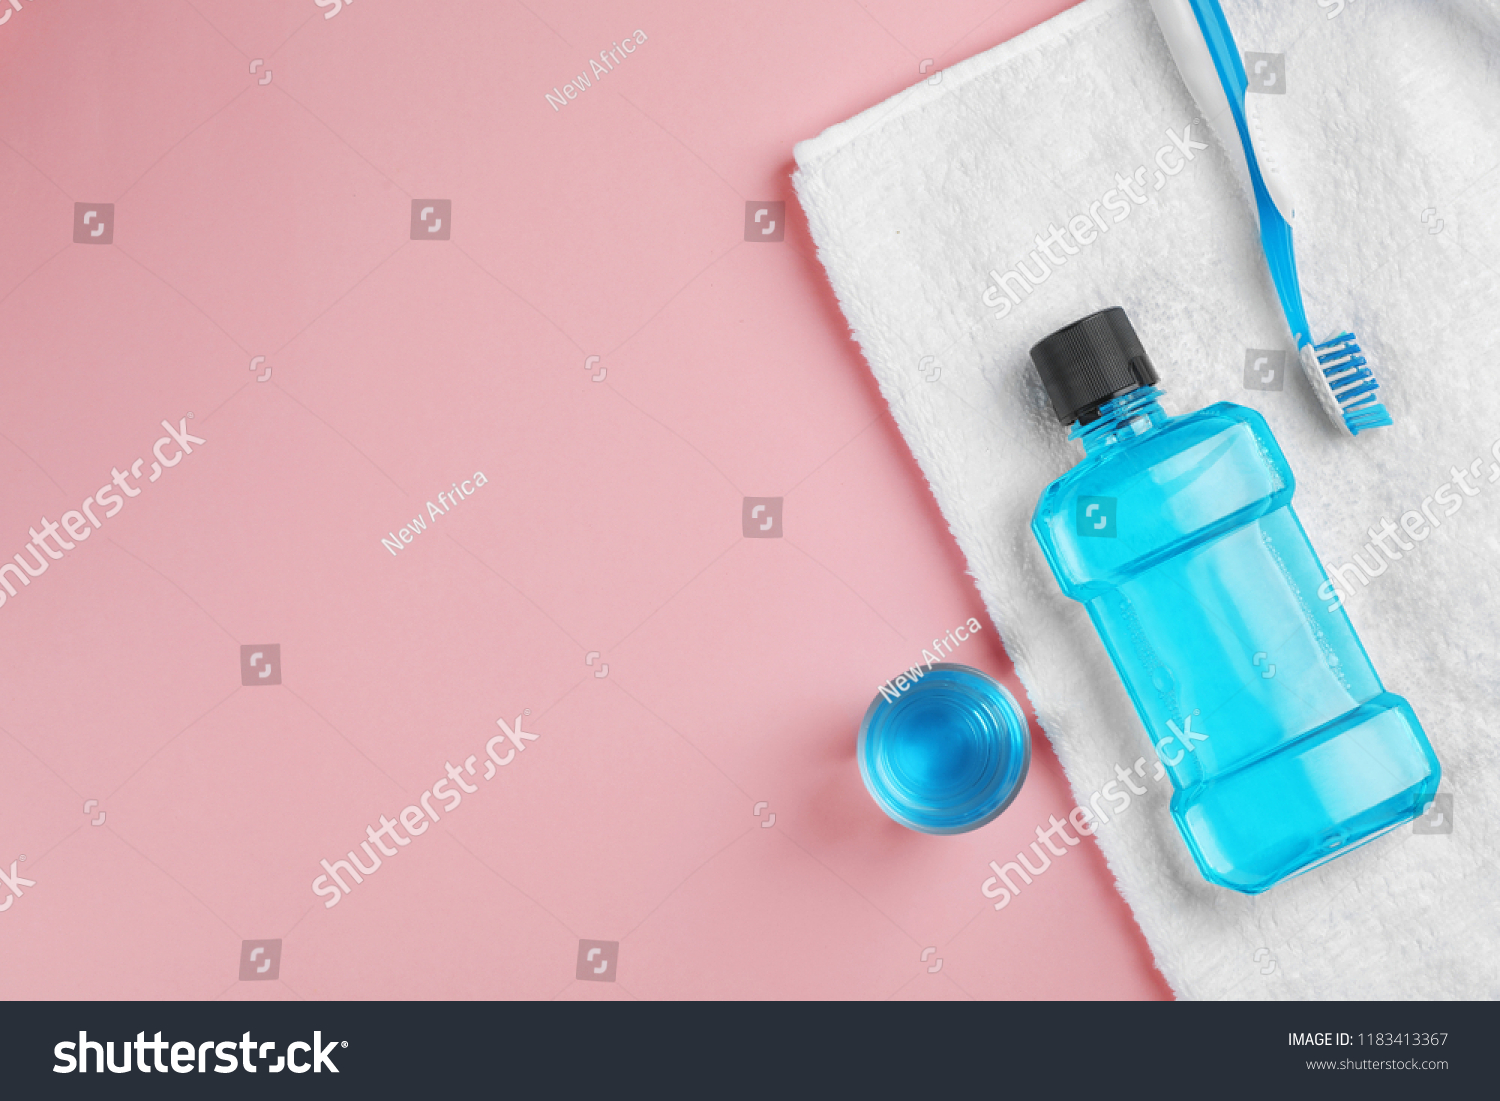 Flat lay composition with oral care products and space for text on color background. Teeth hygiene #1183413367